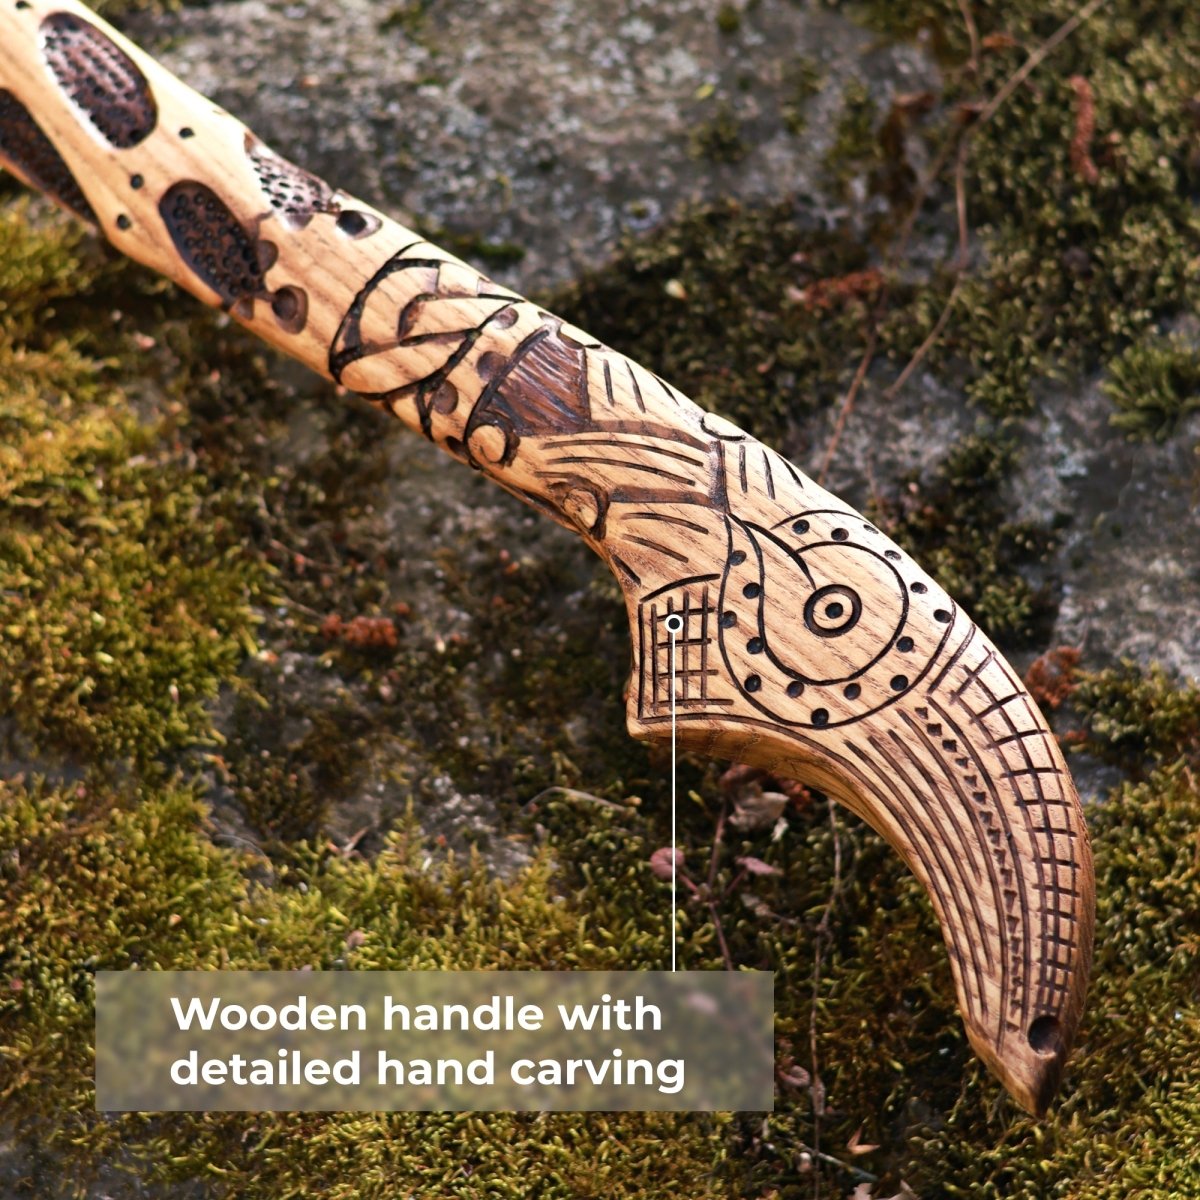 Hand-forged Real Leviathan axe with hardened blade from AncientSmithy